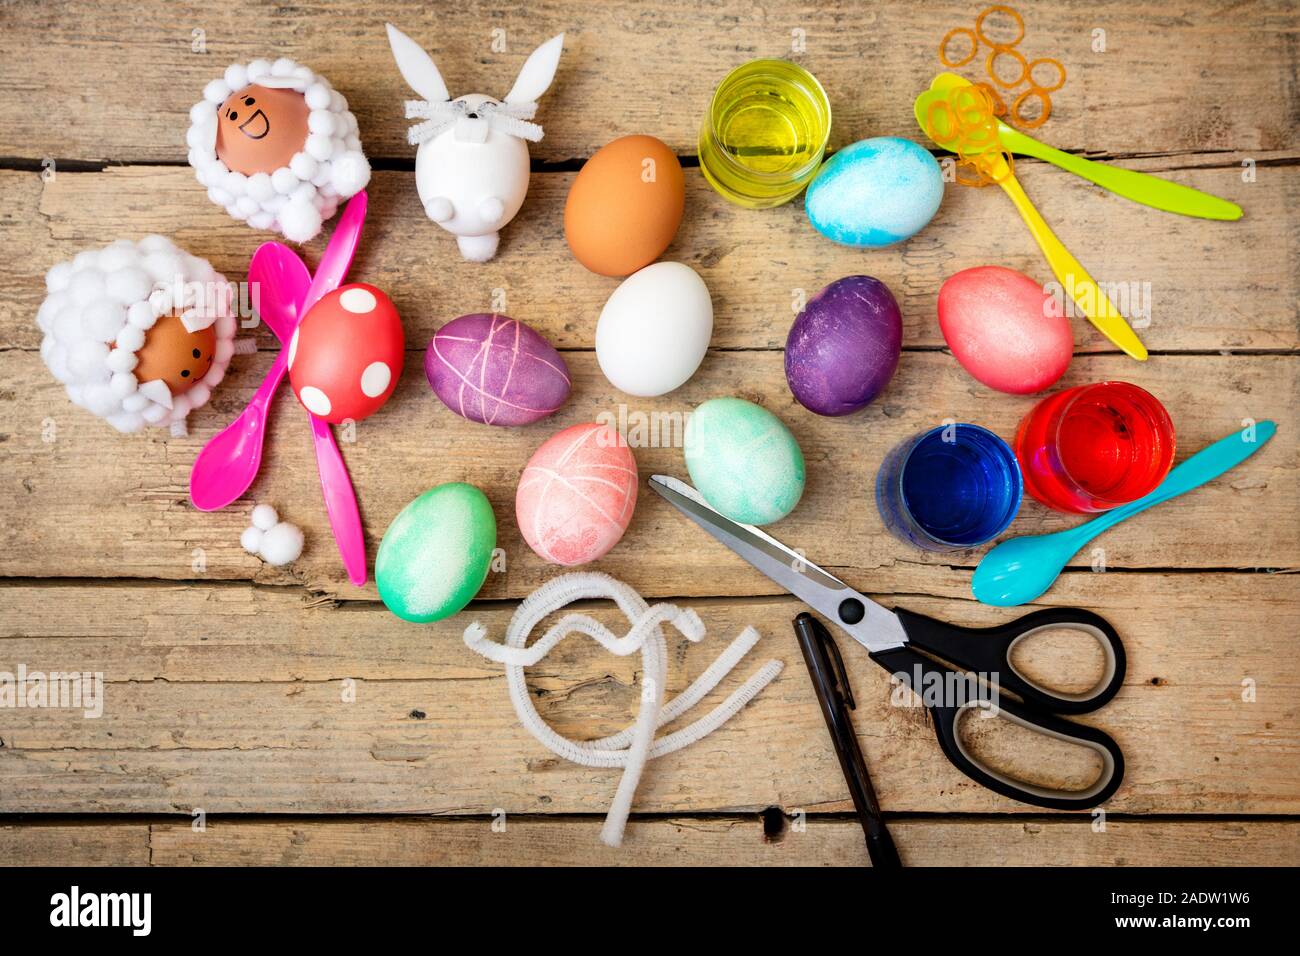 Flatlay, handicrafts and crafts for the easter season, creative decoration materials Stock Photo